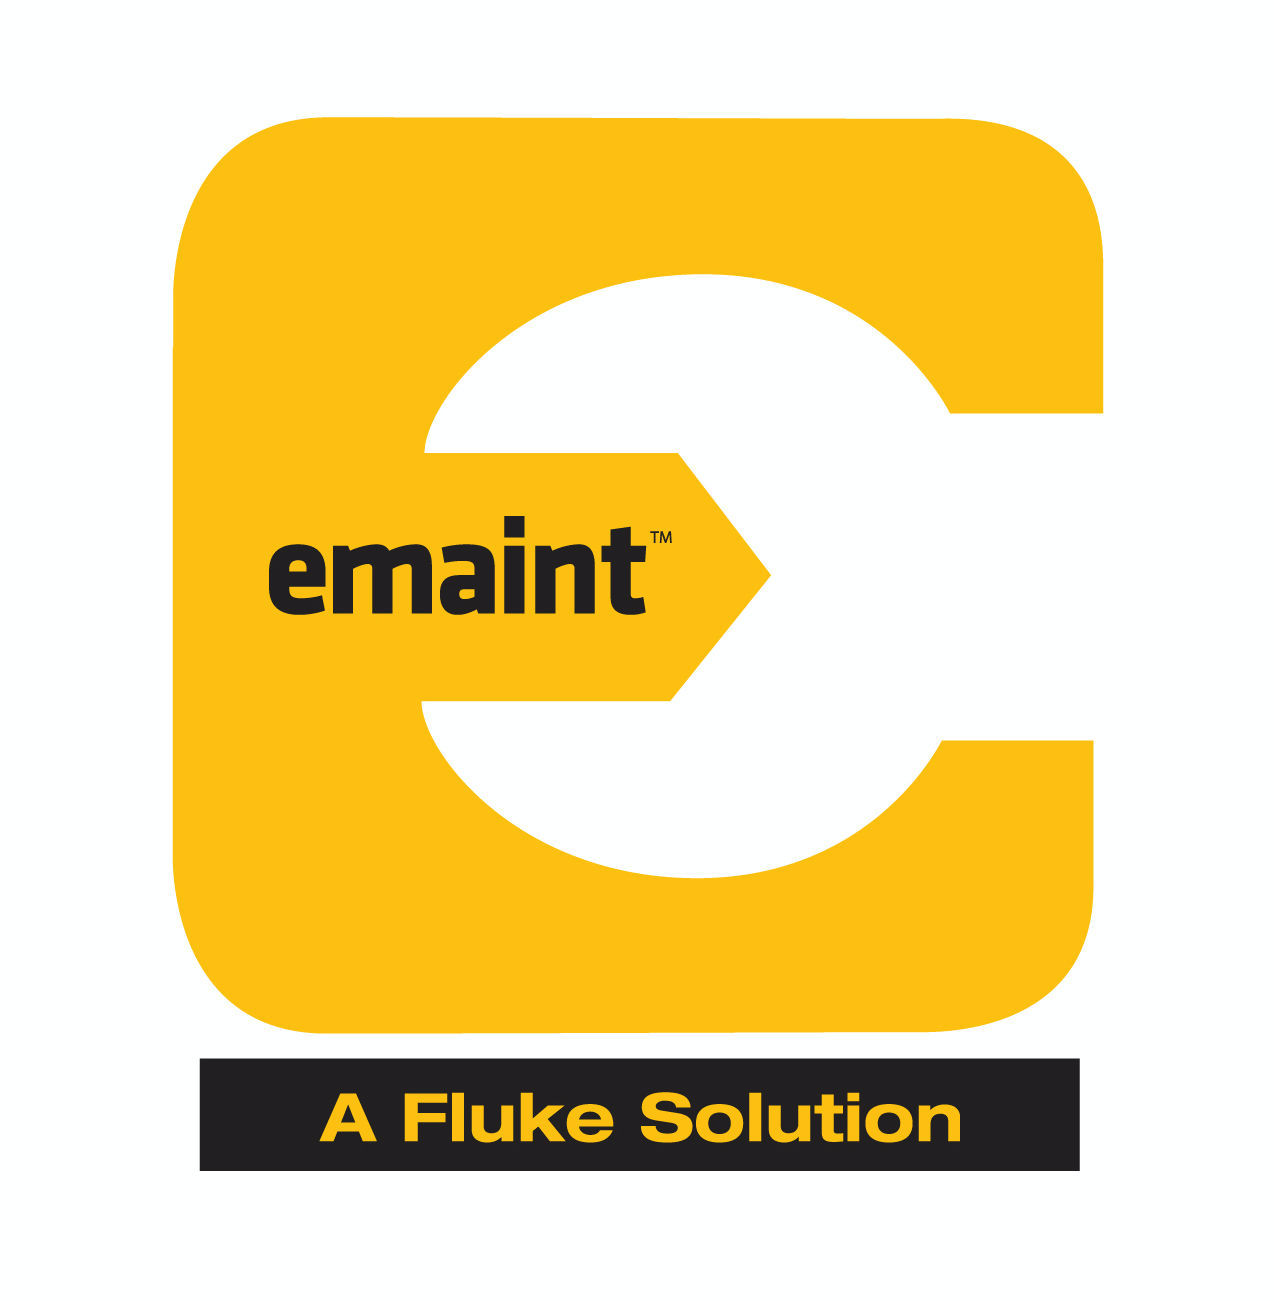 eMaint CMMS - CMMS Software